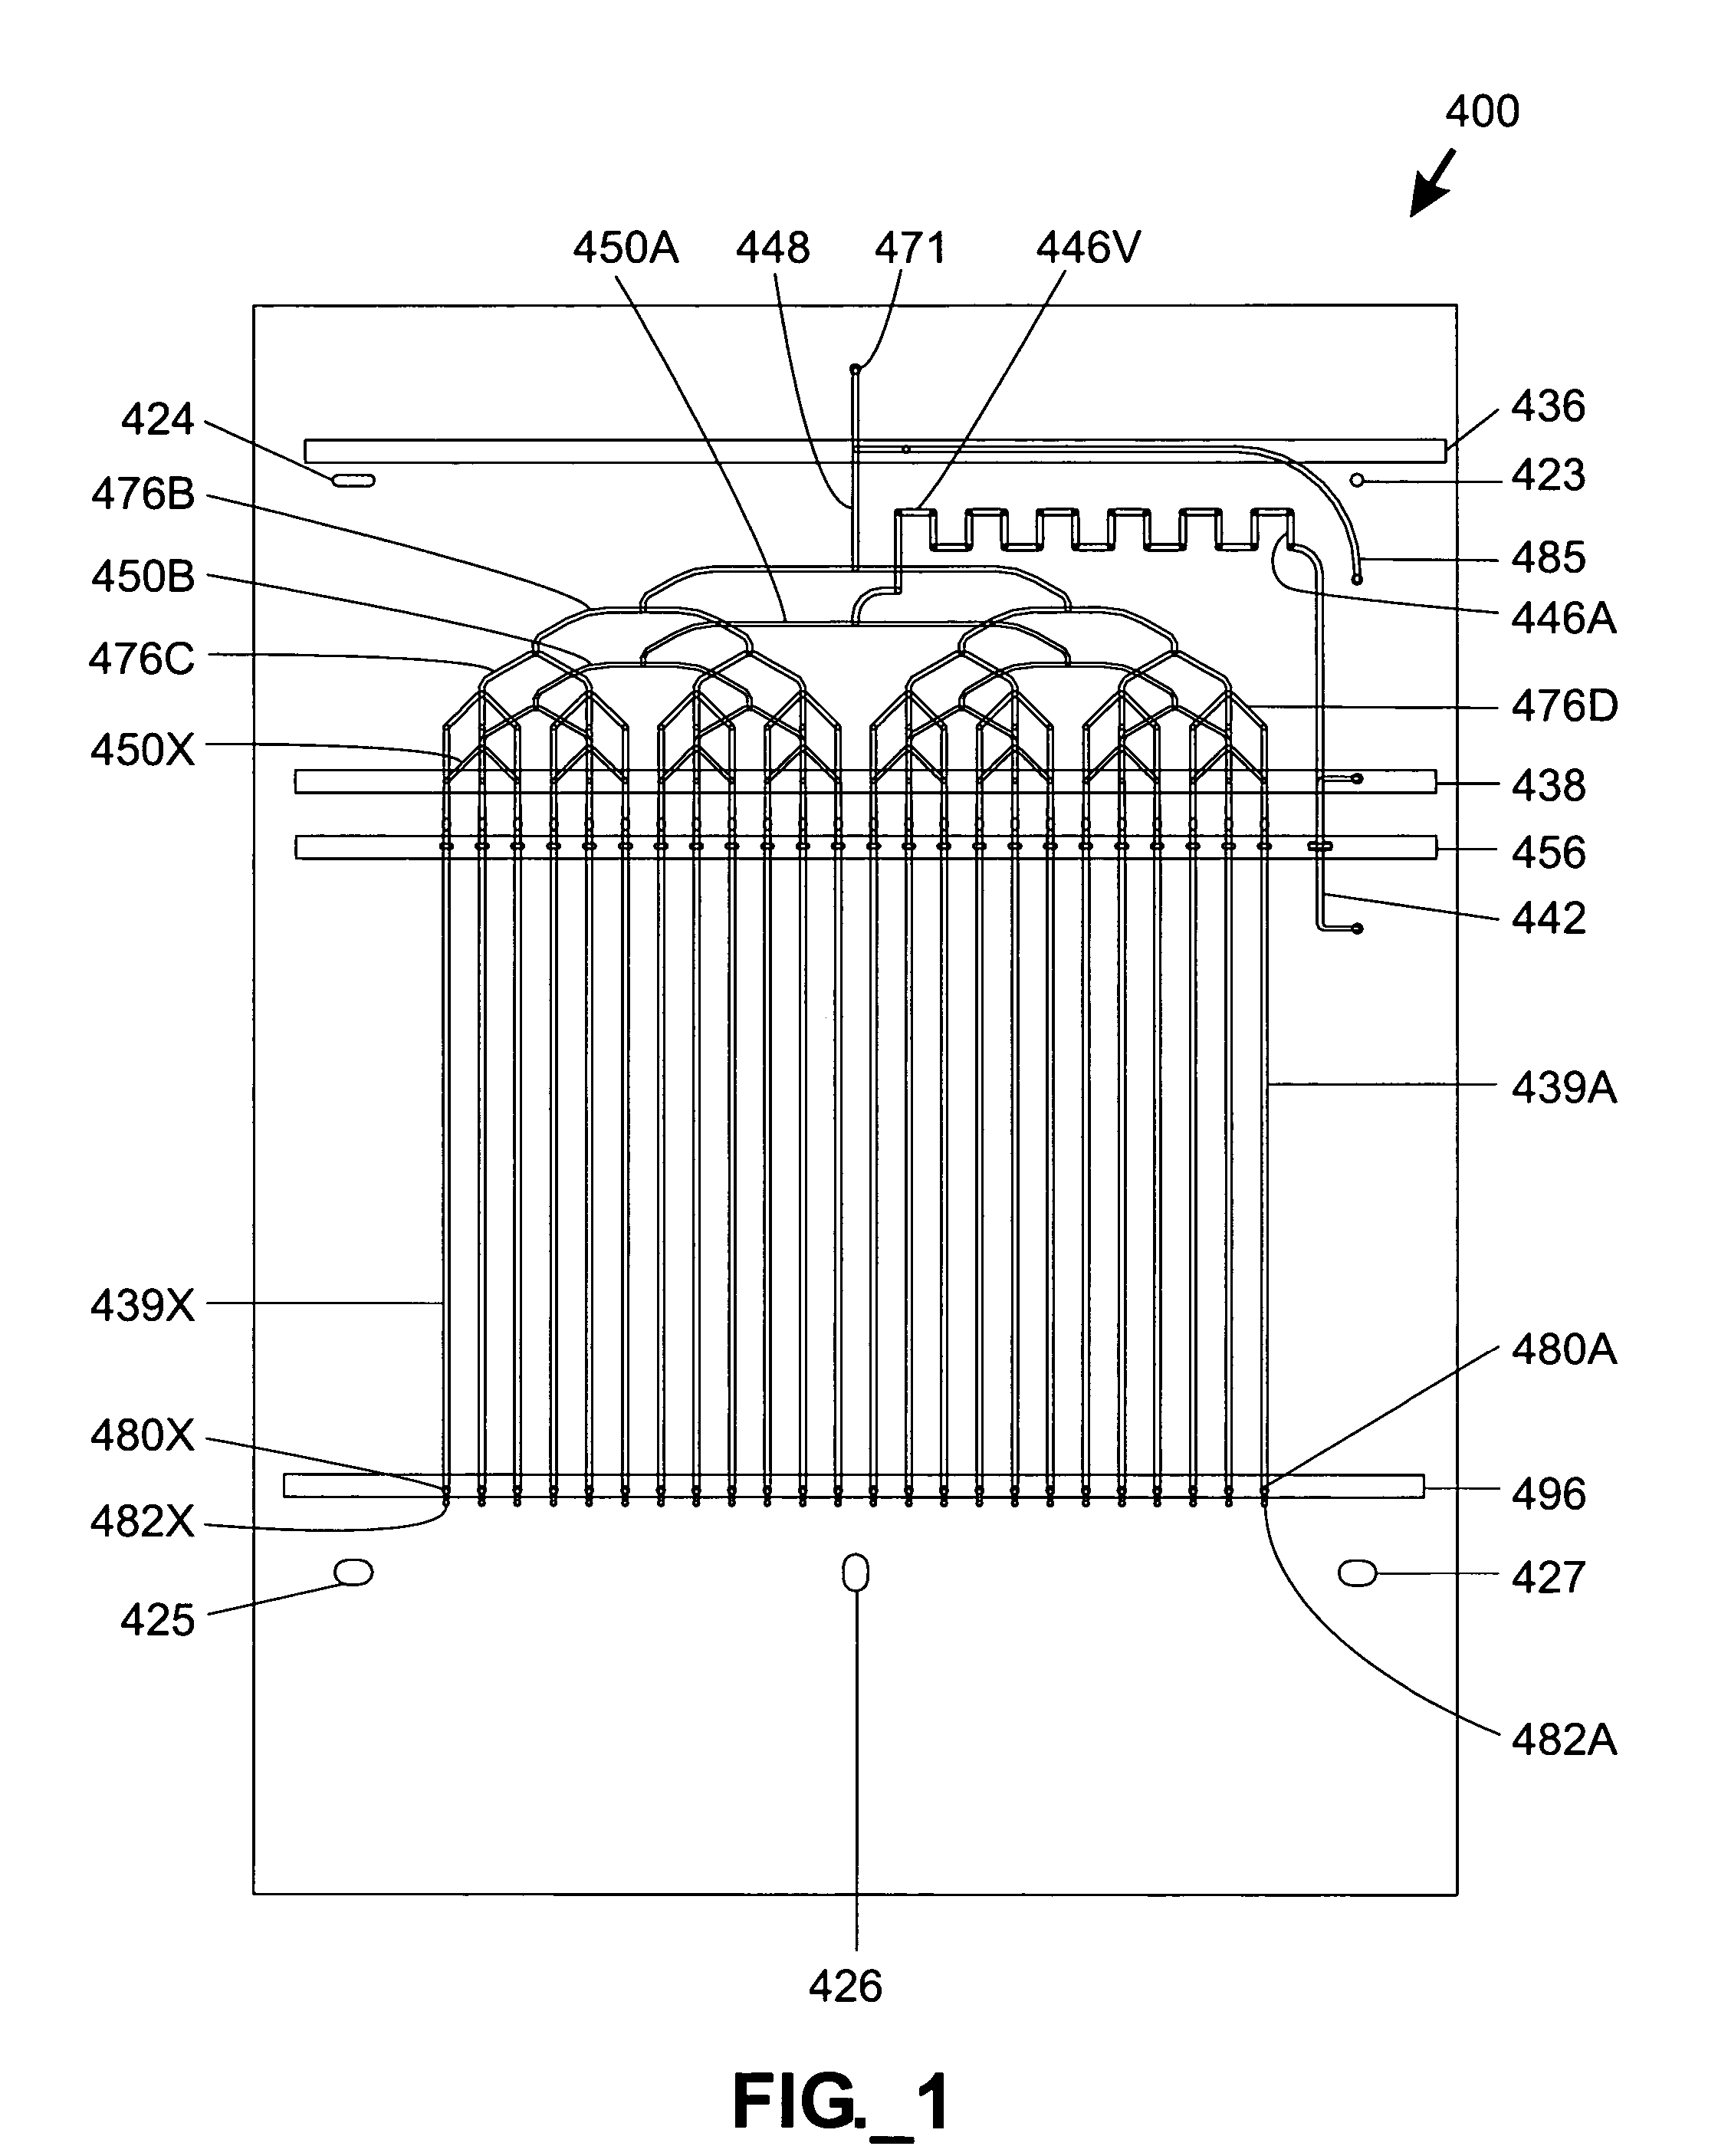 High throughput systems and methods for parallel sample analysis